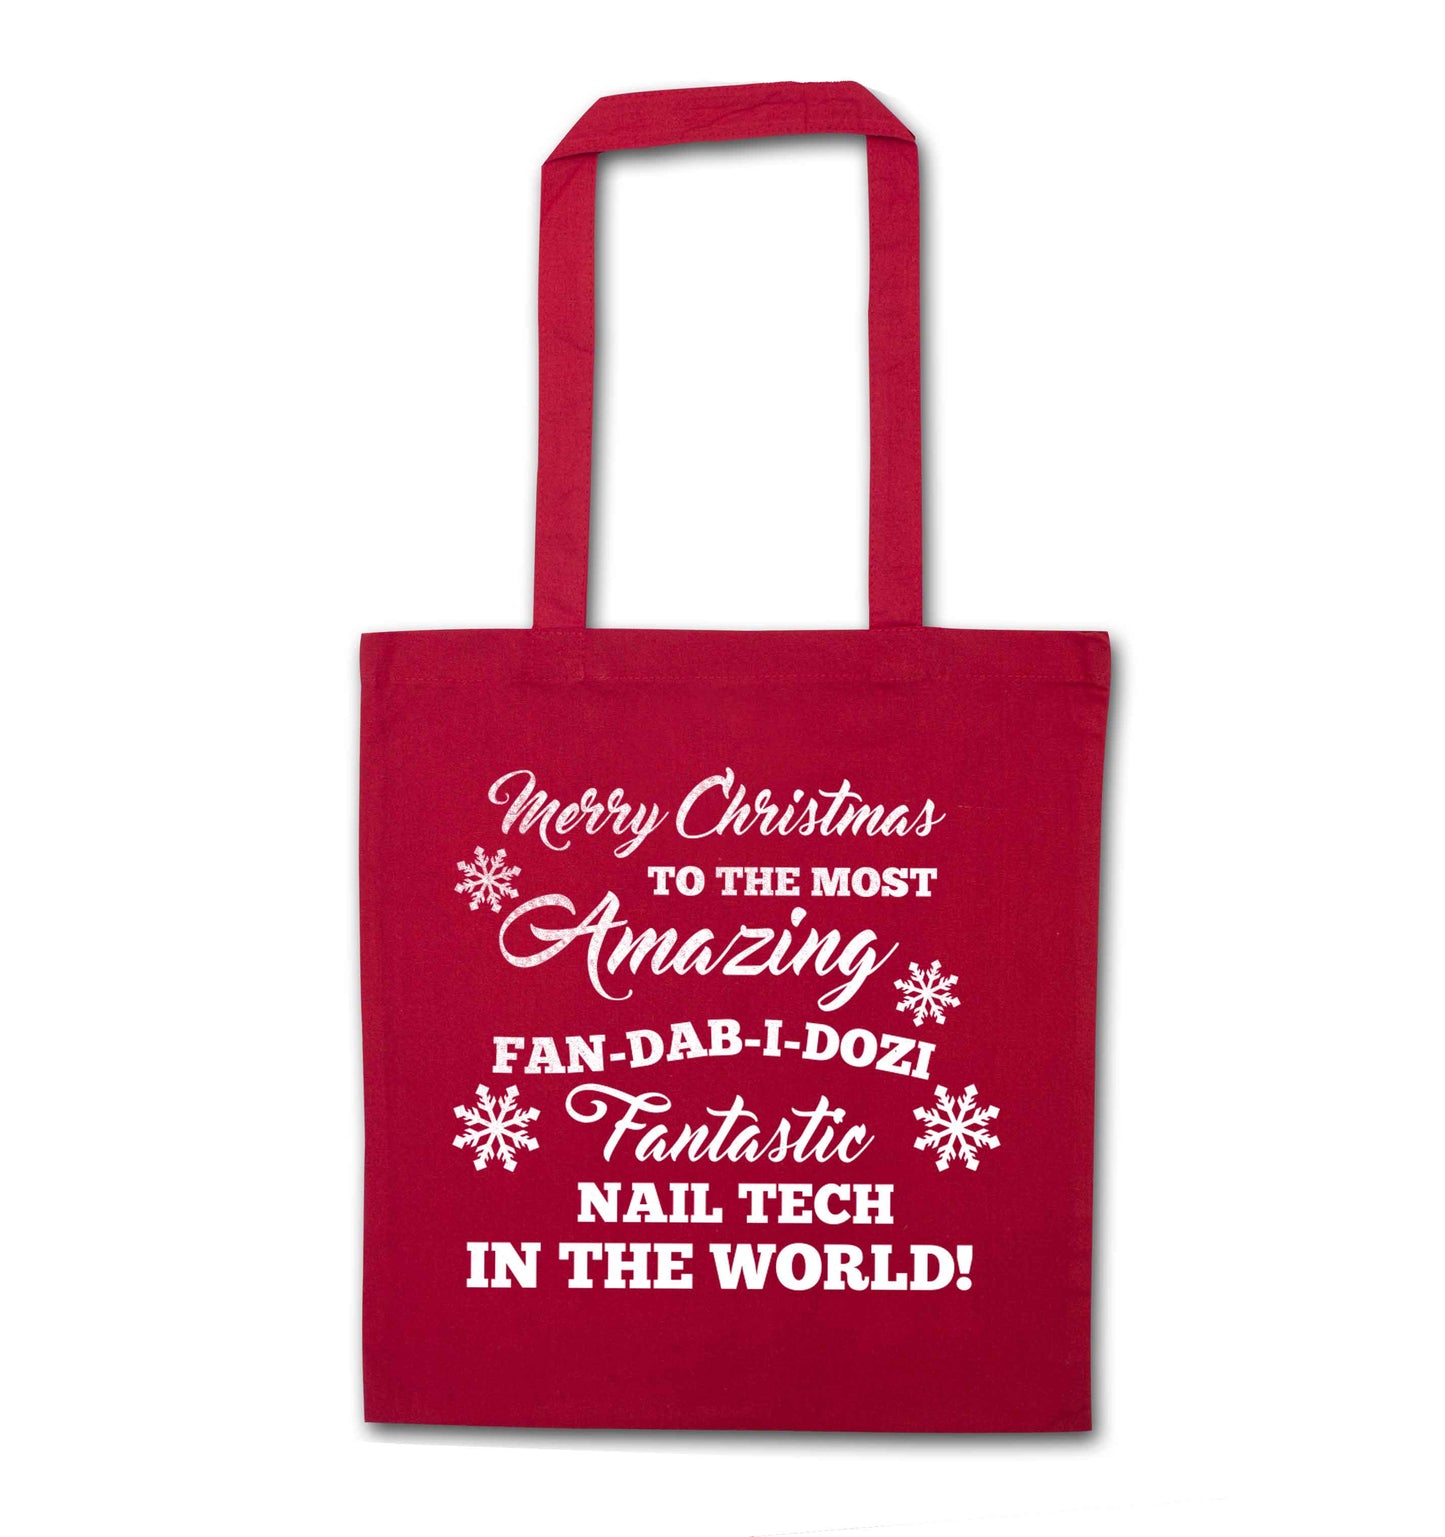 Merry Christmas to the most amazing fan-dab-i-dozi fantasic nail technician in the world red tote bag